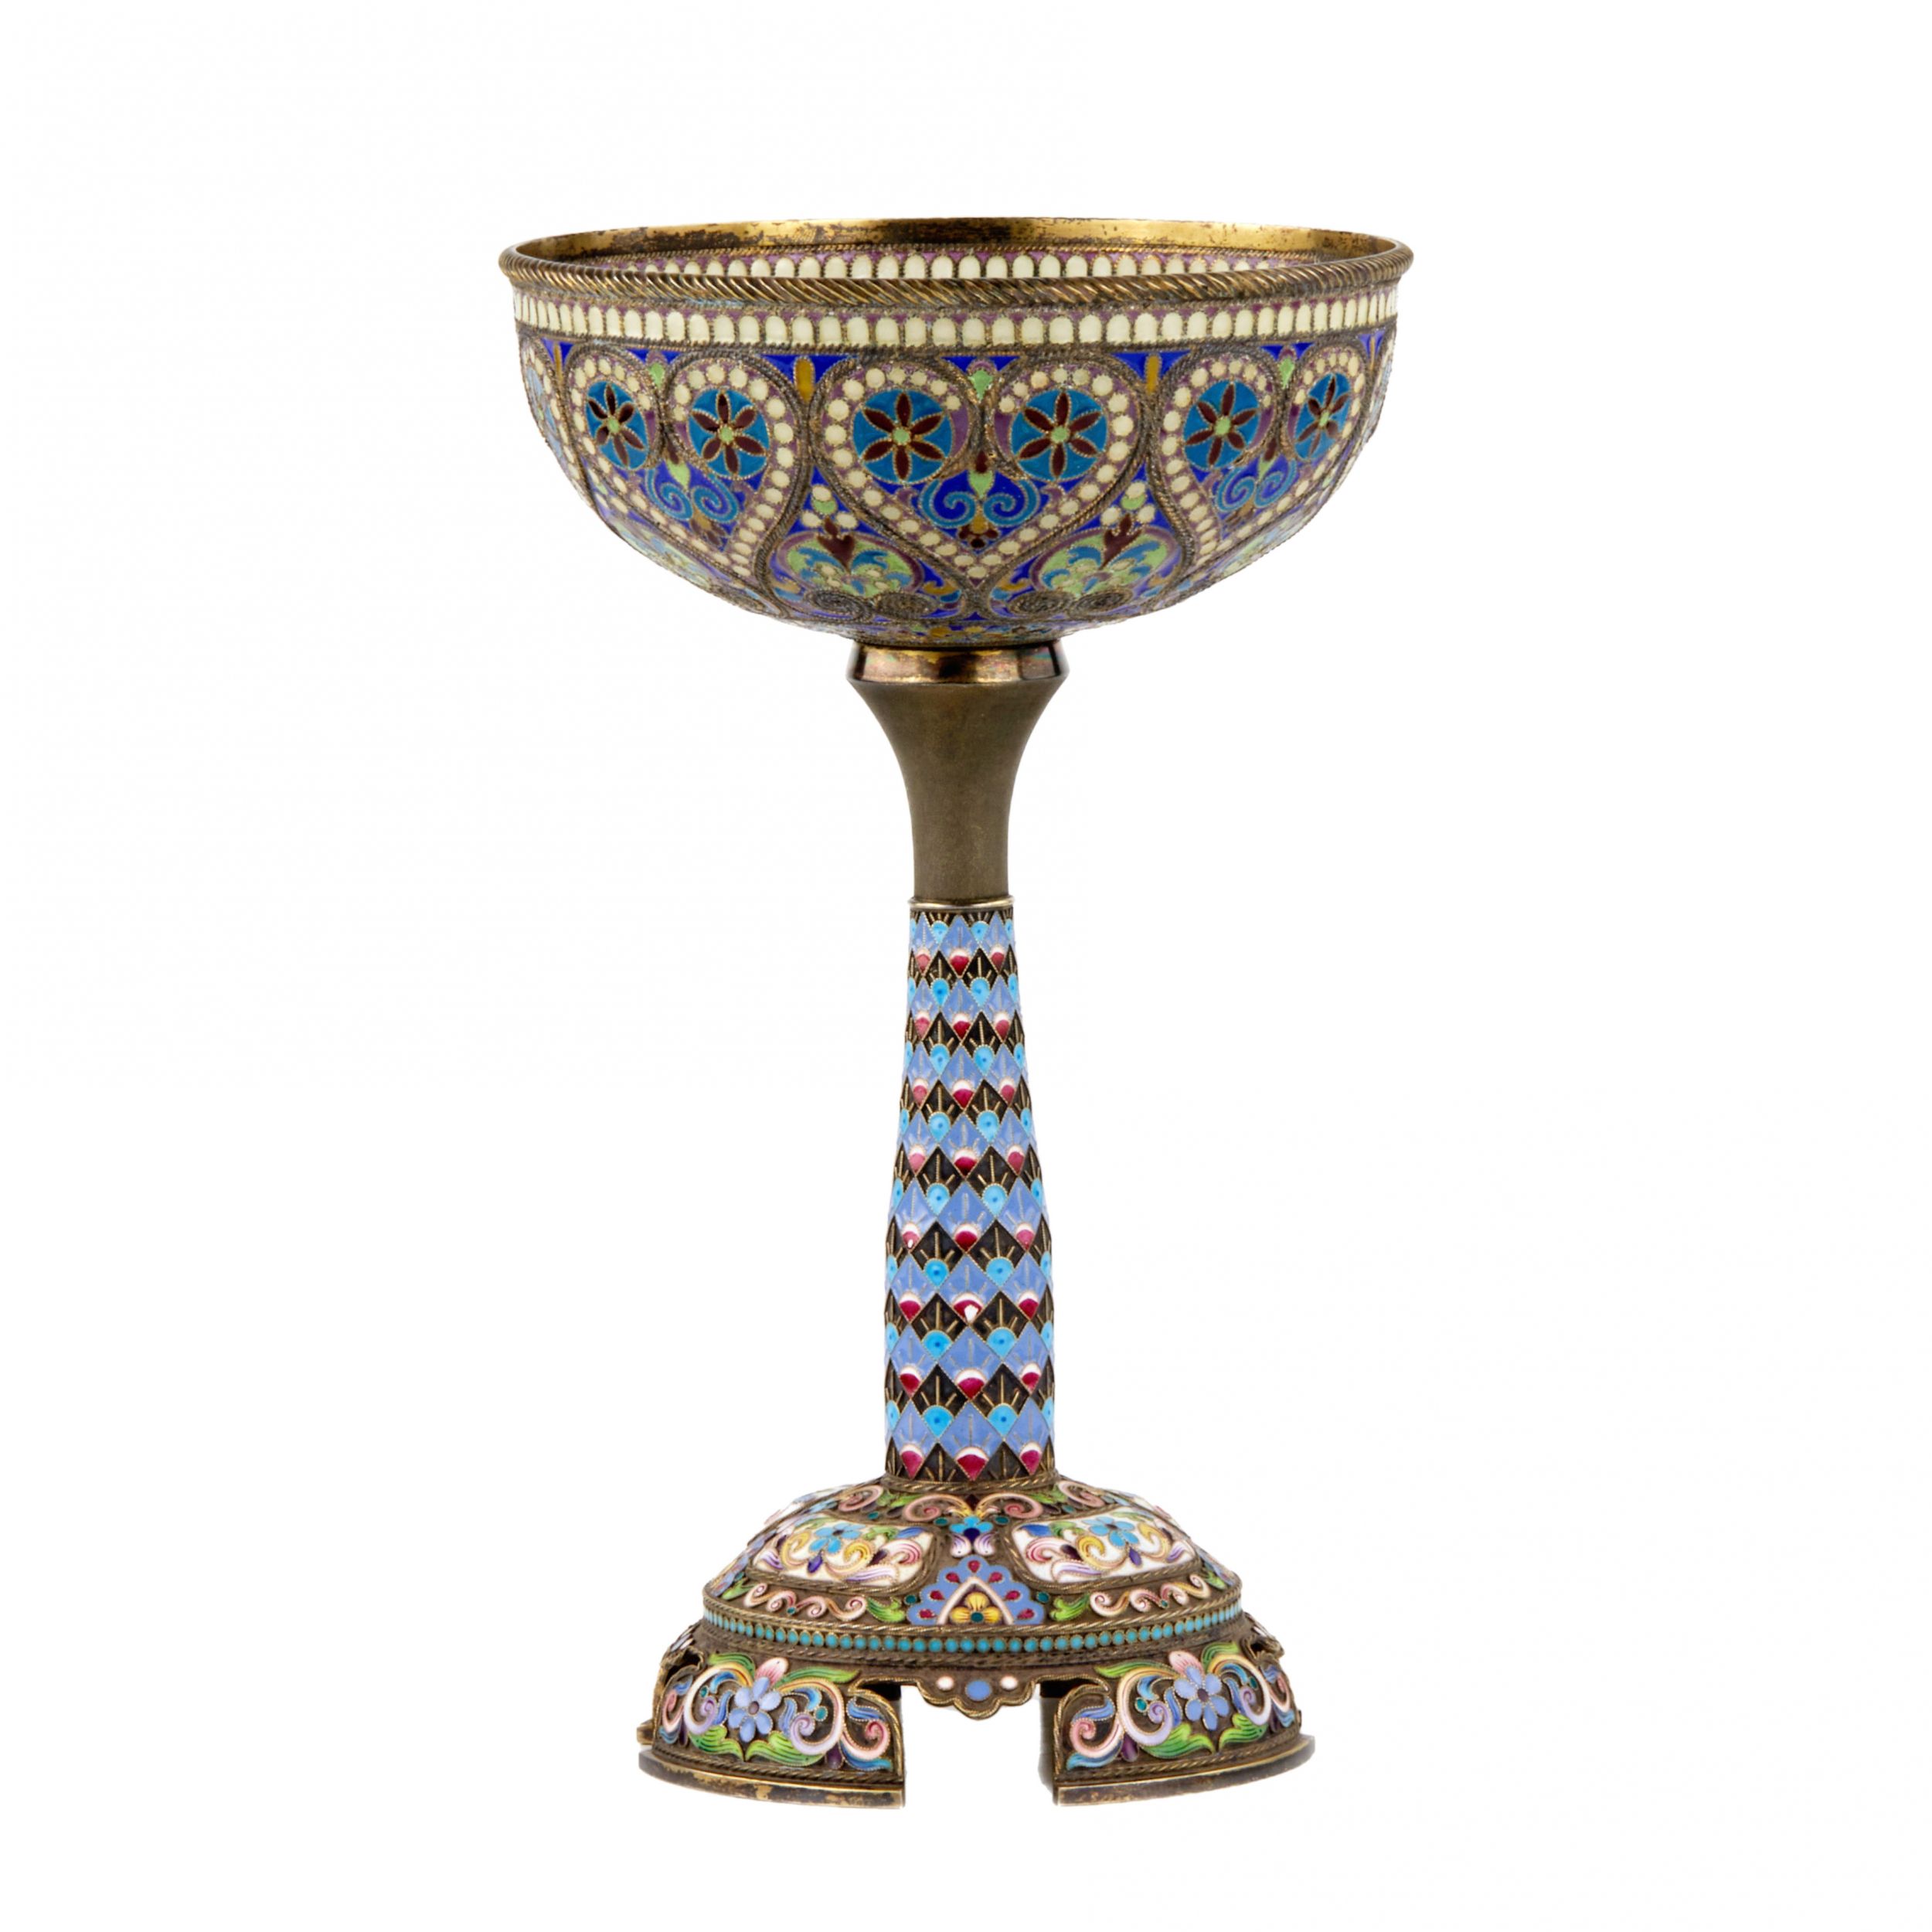 The-magnificent-silver-goblet-of-Ivan-Khlebnikov:-painted-cloisonné-and-stained-glass-enamels-